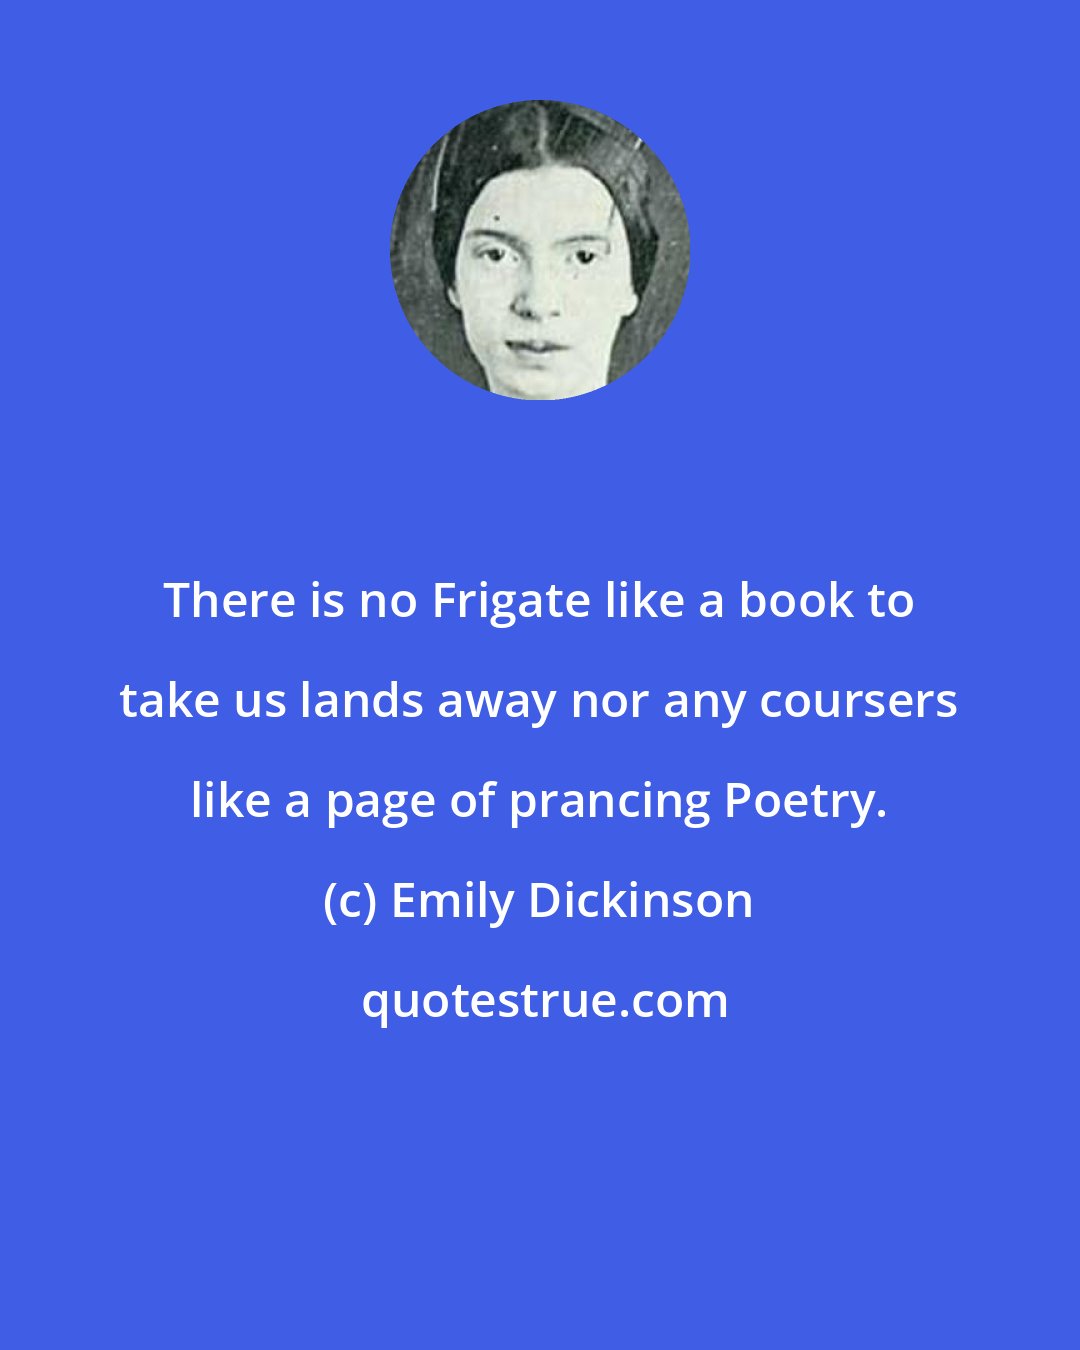 Emily Dickinson: There is no Frigate like a book to take us lands away nor any coursers like a page of prancing Poetry.